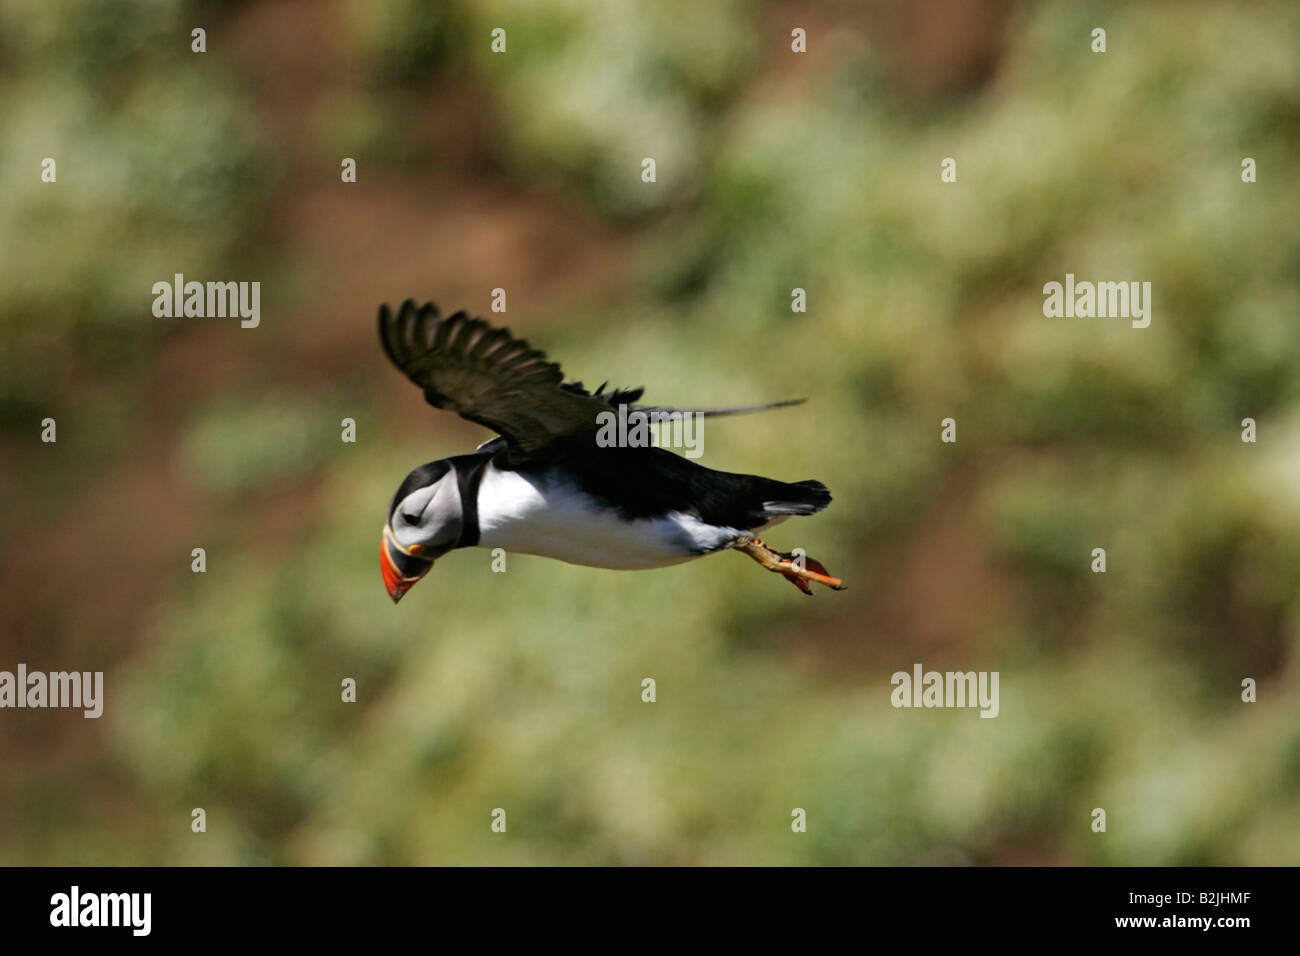 Puffin in air coming in to land Stock Photo